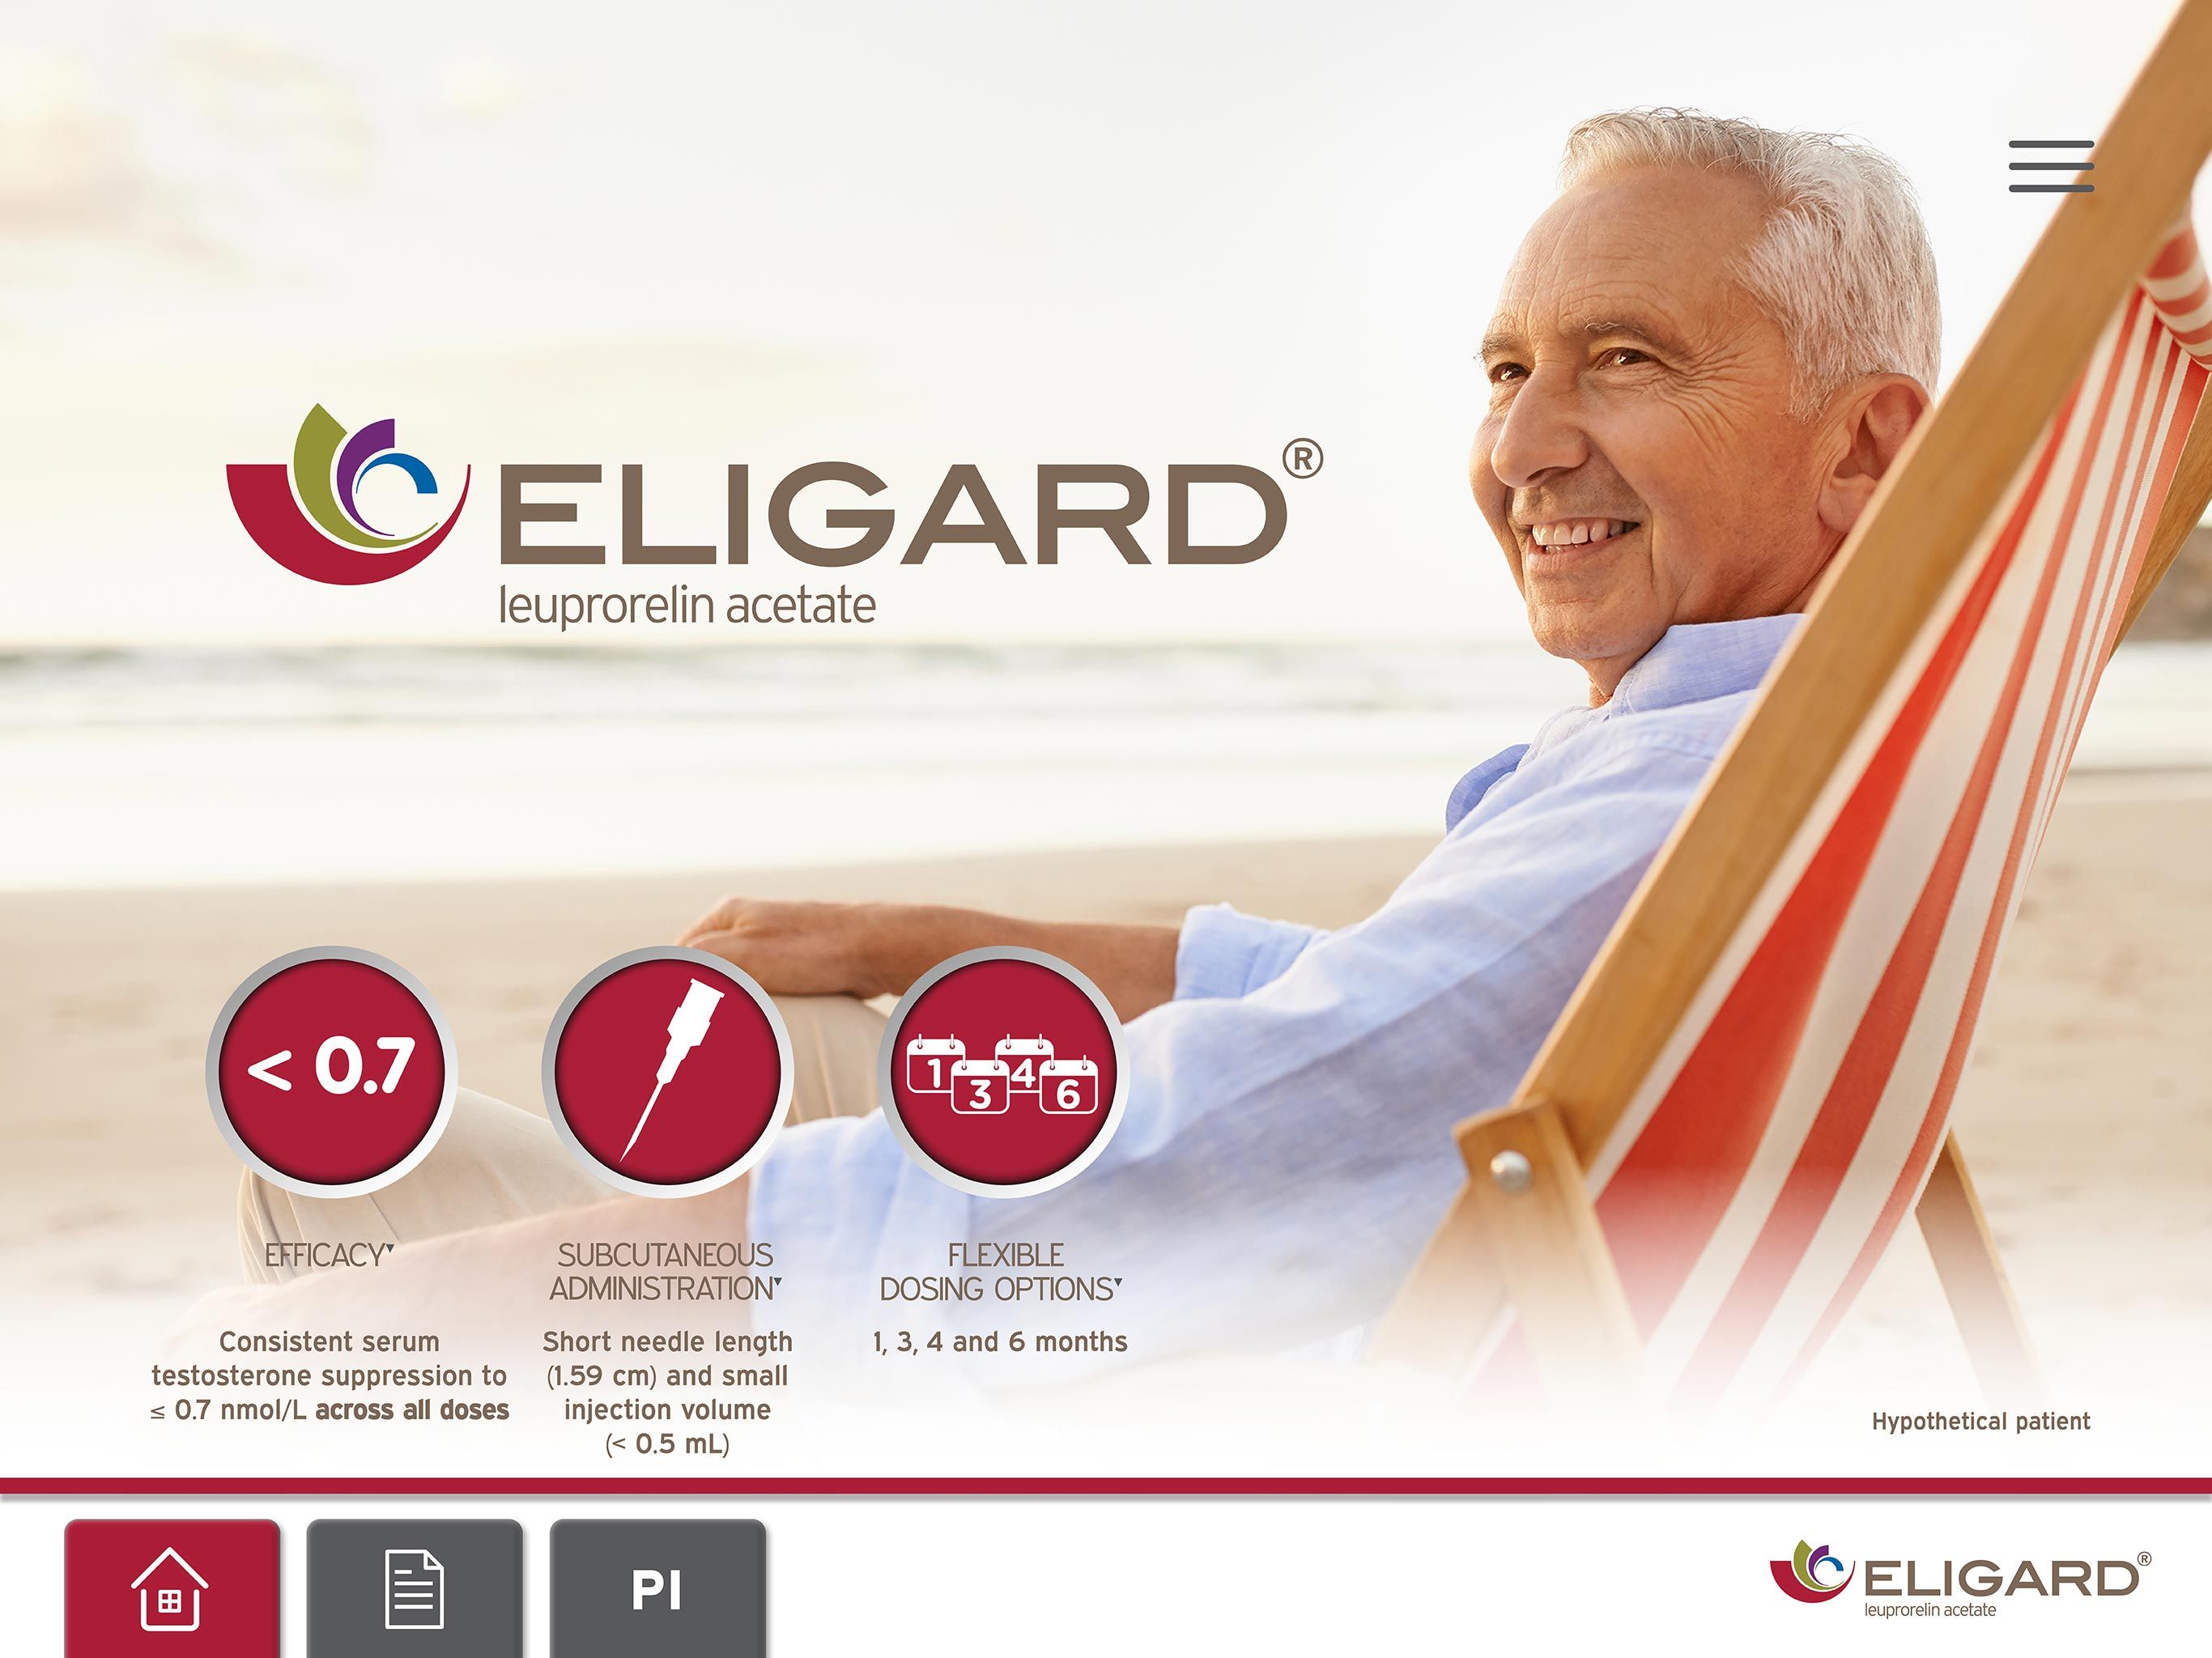 DDB Remedy - Mundipharma - Eligard eDetailers slide and popup updates for iPad application